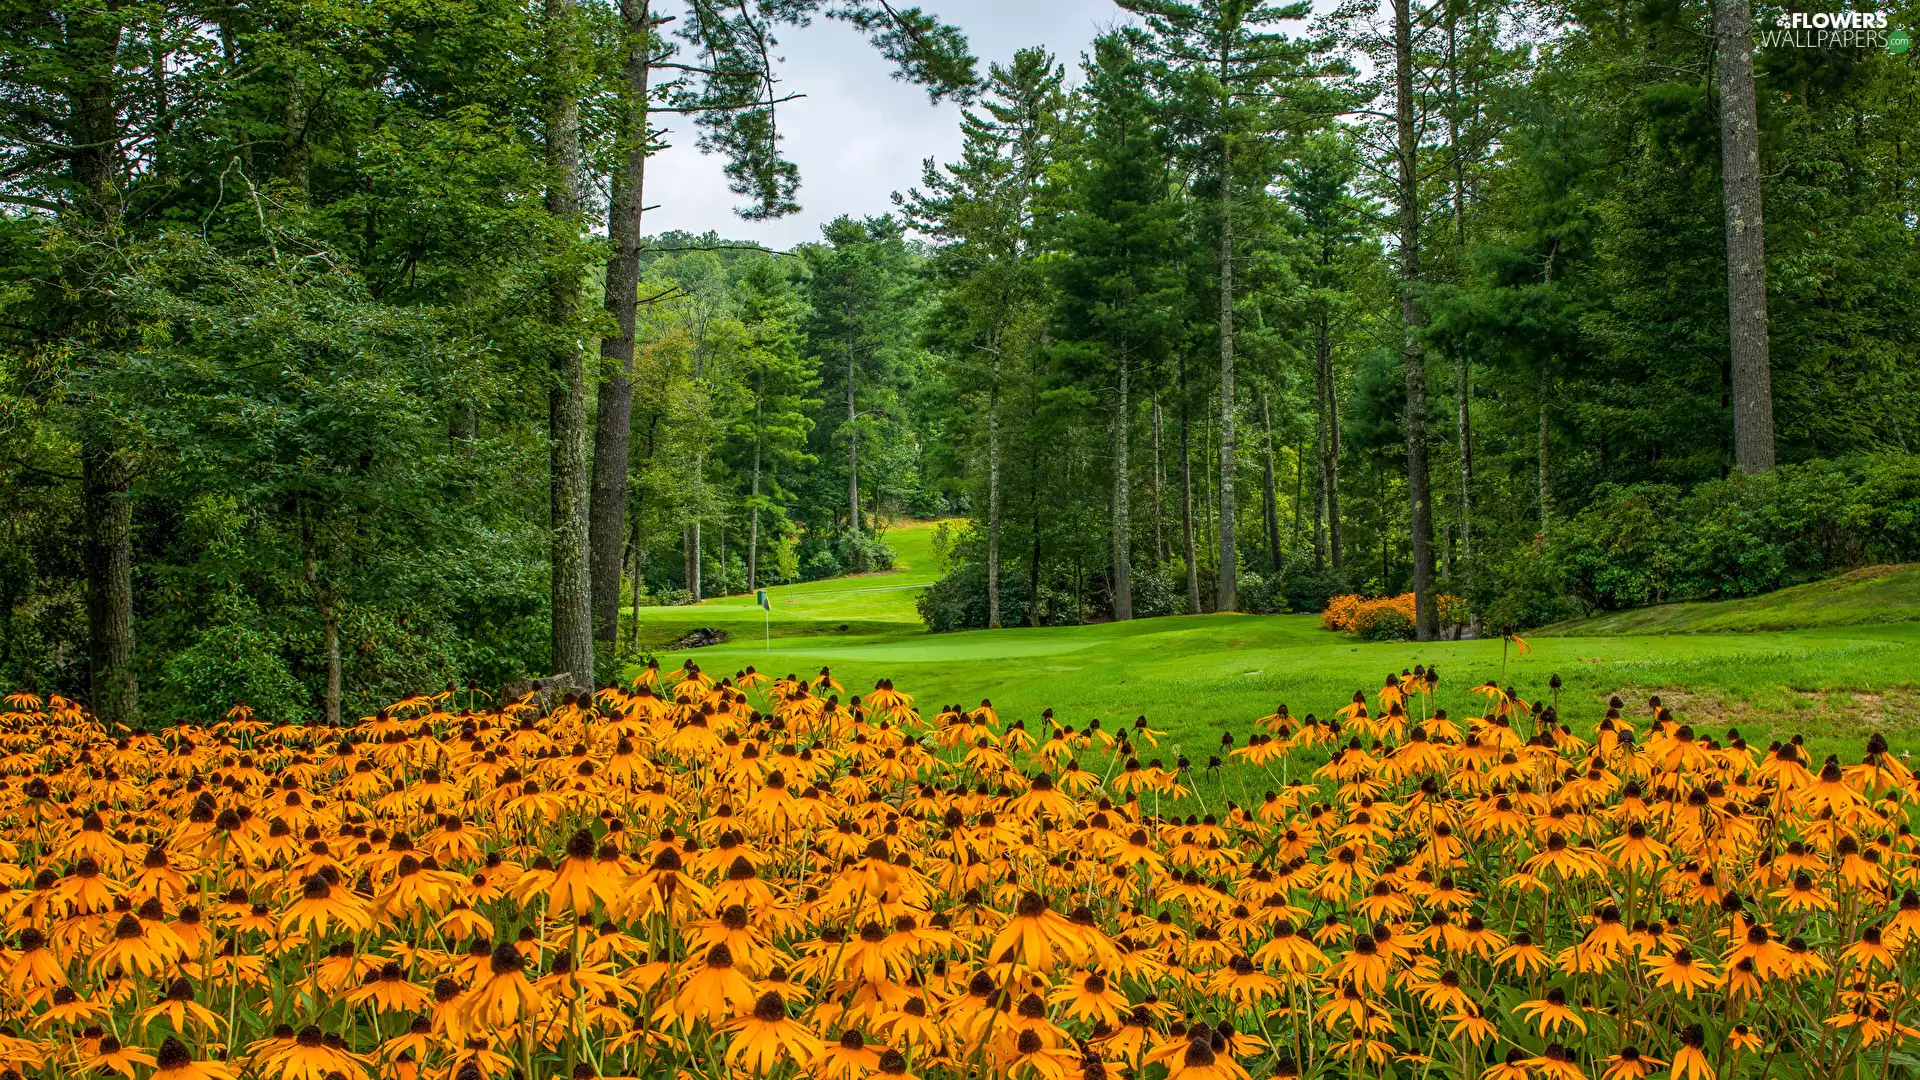 Rudbeckia, Park, trees, viewes, lawns, Flowers